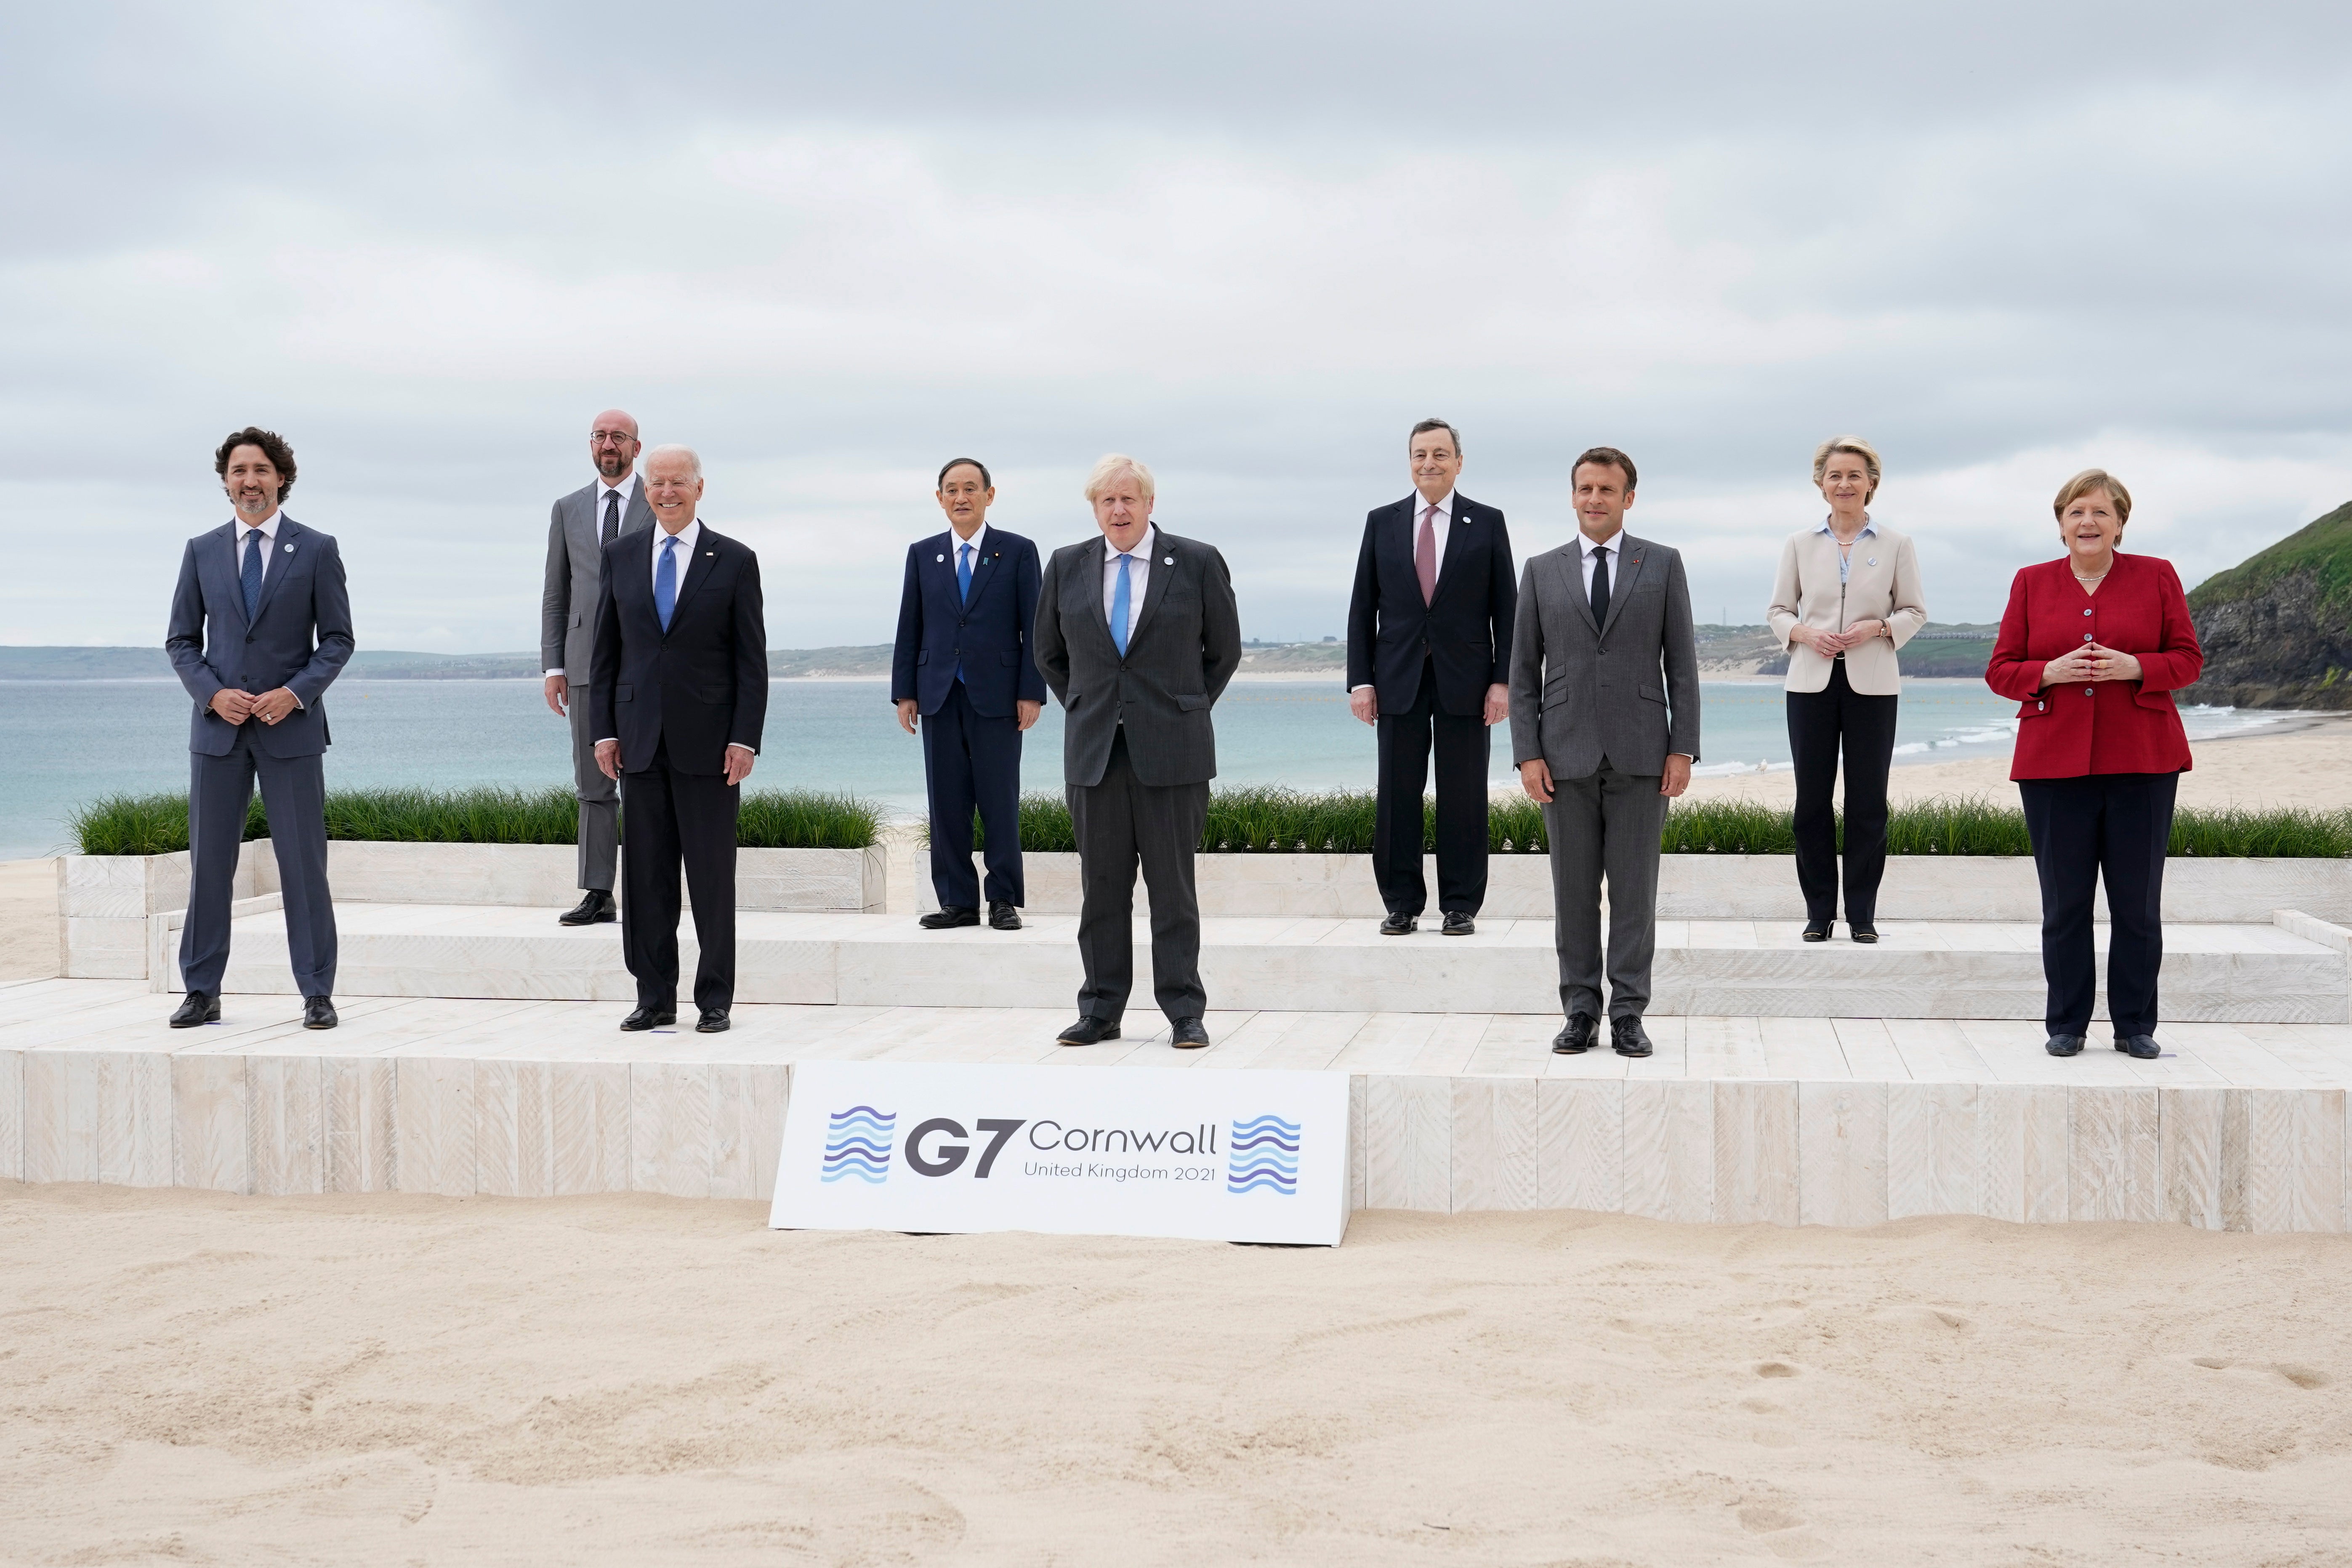 President Joe Biden (third from left) with the leaders of the G7 in Cornwall last week